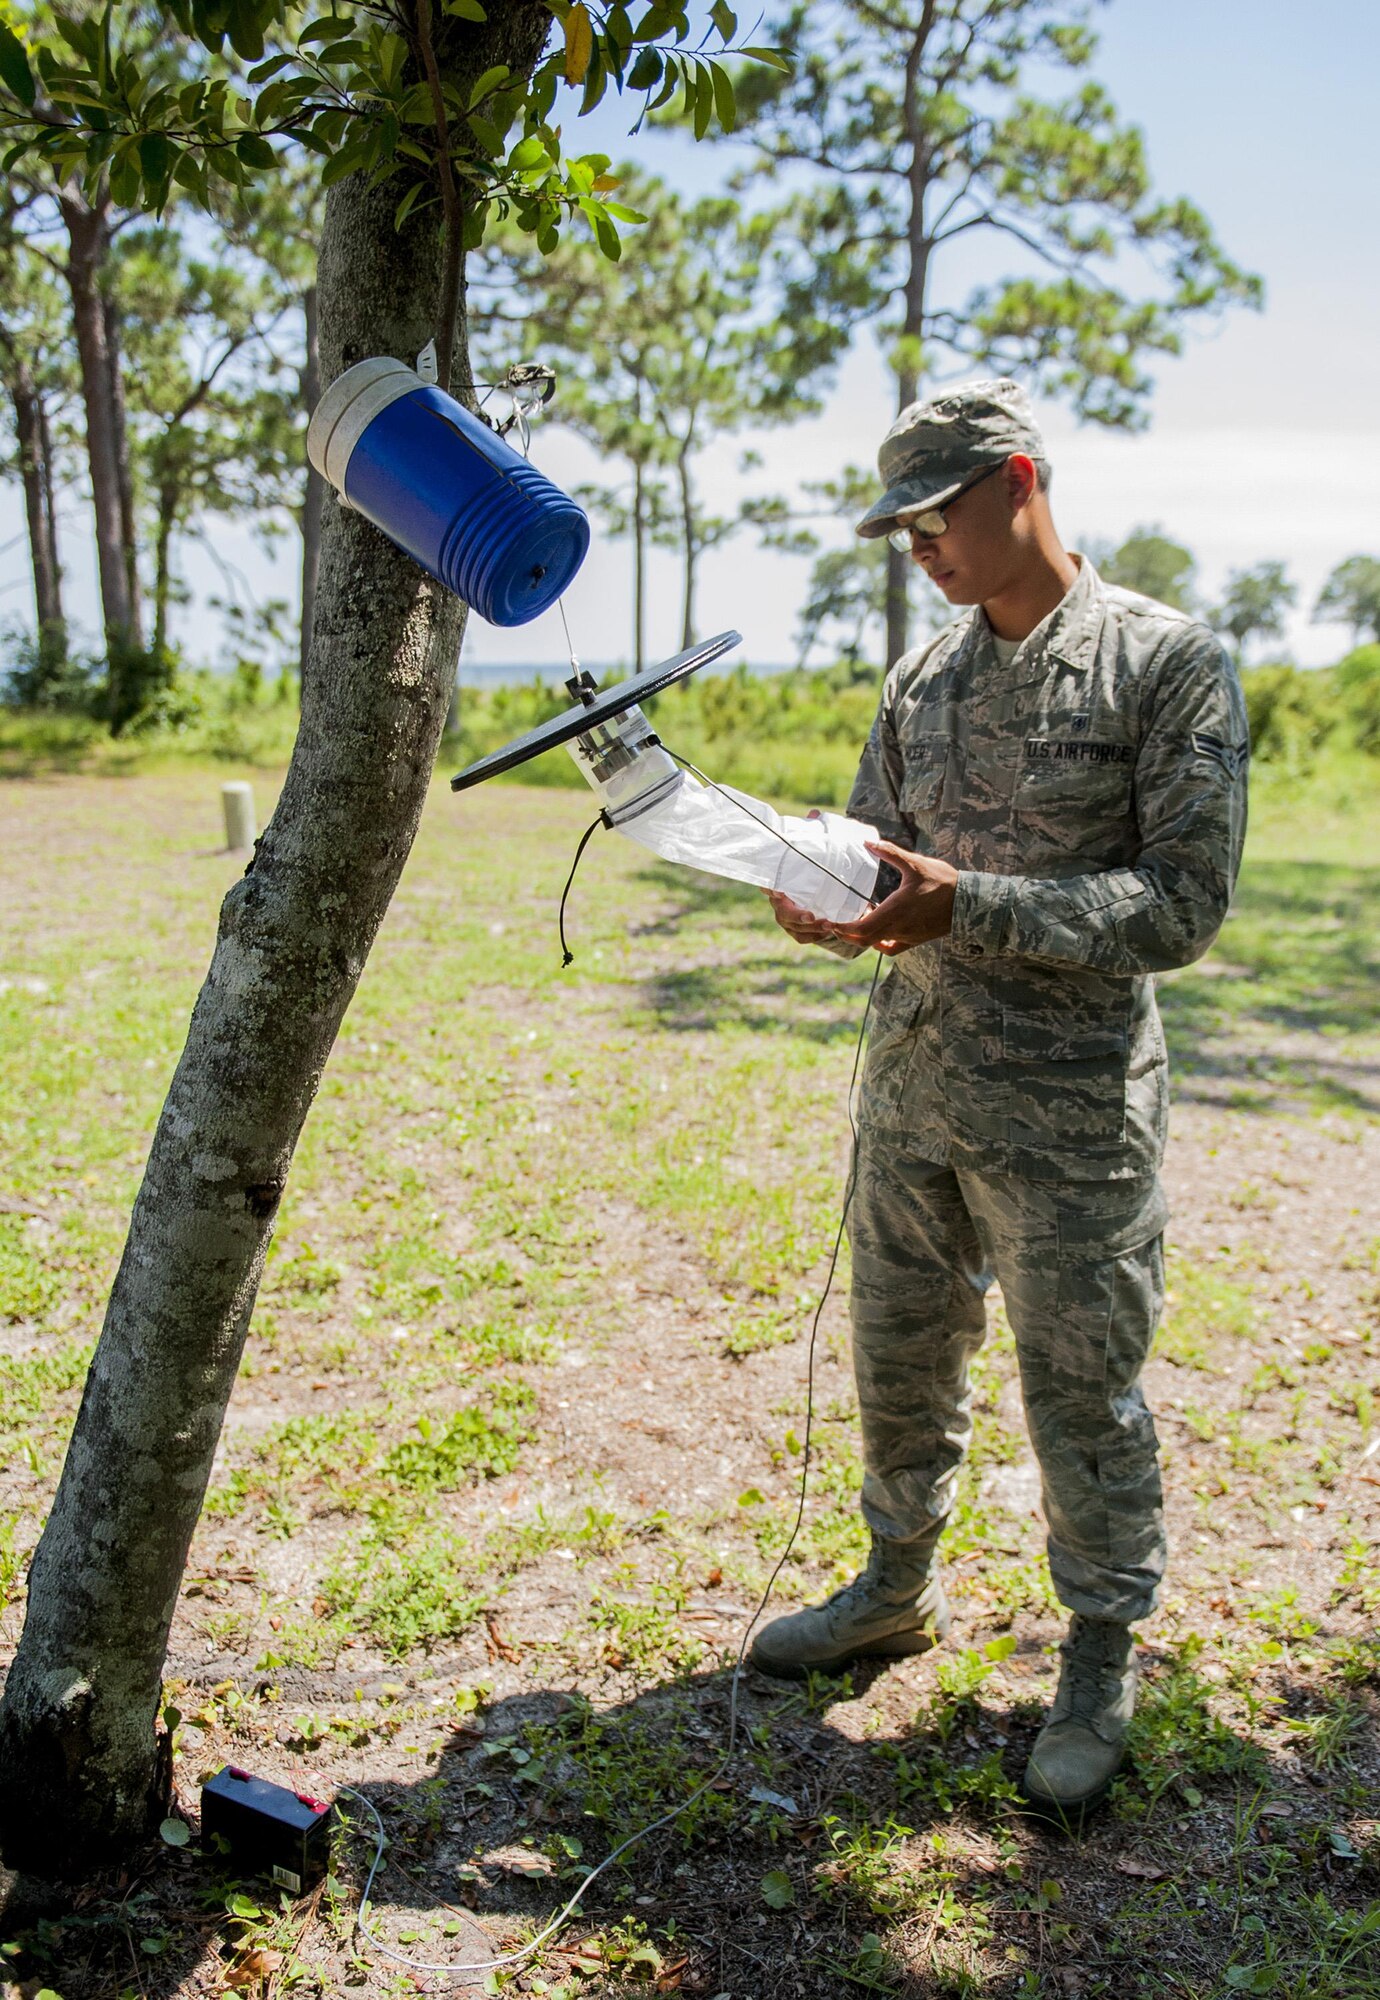 Airman 1st Class Stephen Nicer, 96th Aerospace Medicine Squadron public health technician, checks the mosquito trap near base housing July 20 at Eglin Air Force Base Fla. Nicer ensures the trap functions properly. The trap is used to catch a variety of mosquitoes during the evening hours. (U.S. Air Force photo/Ilka Cole)